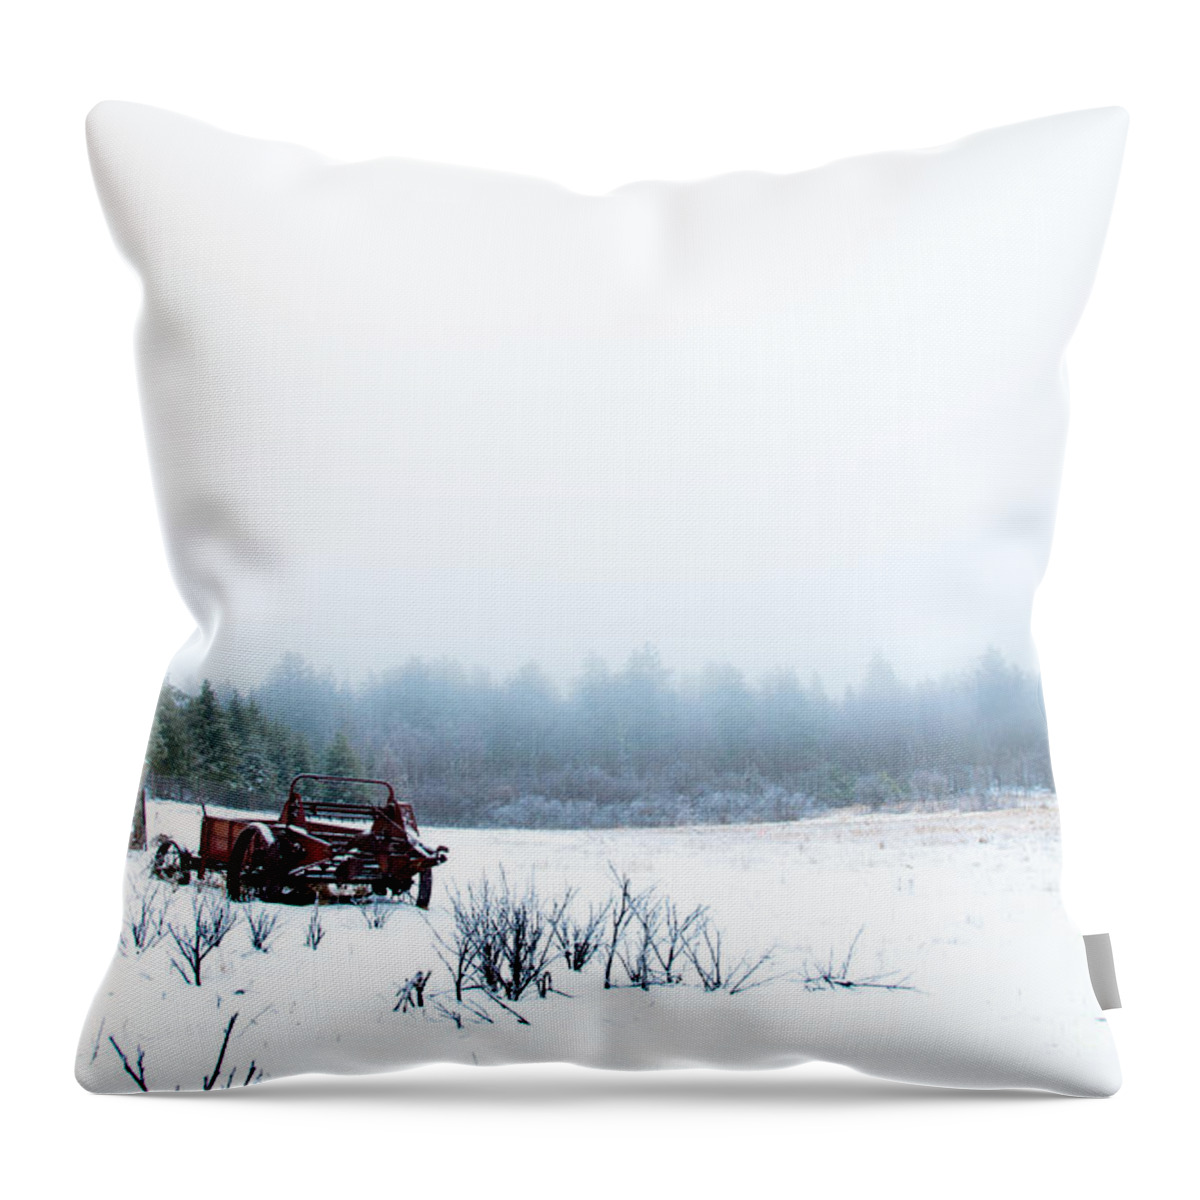 Frost Throw Pillow featuring the photograph Old Manure Spreader by Cheryl Baxter